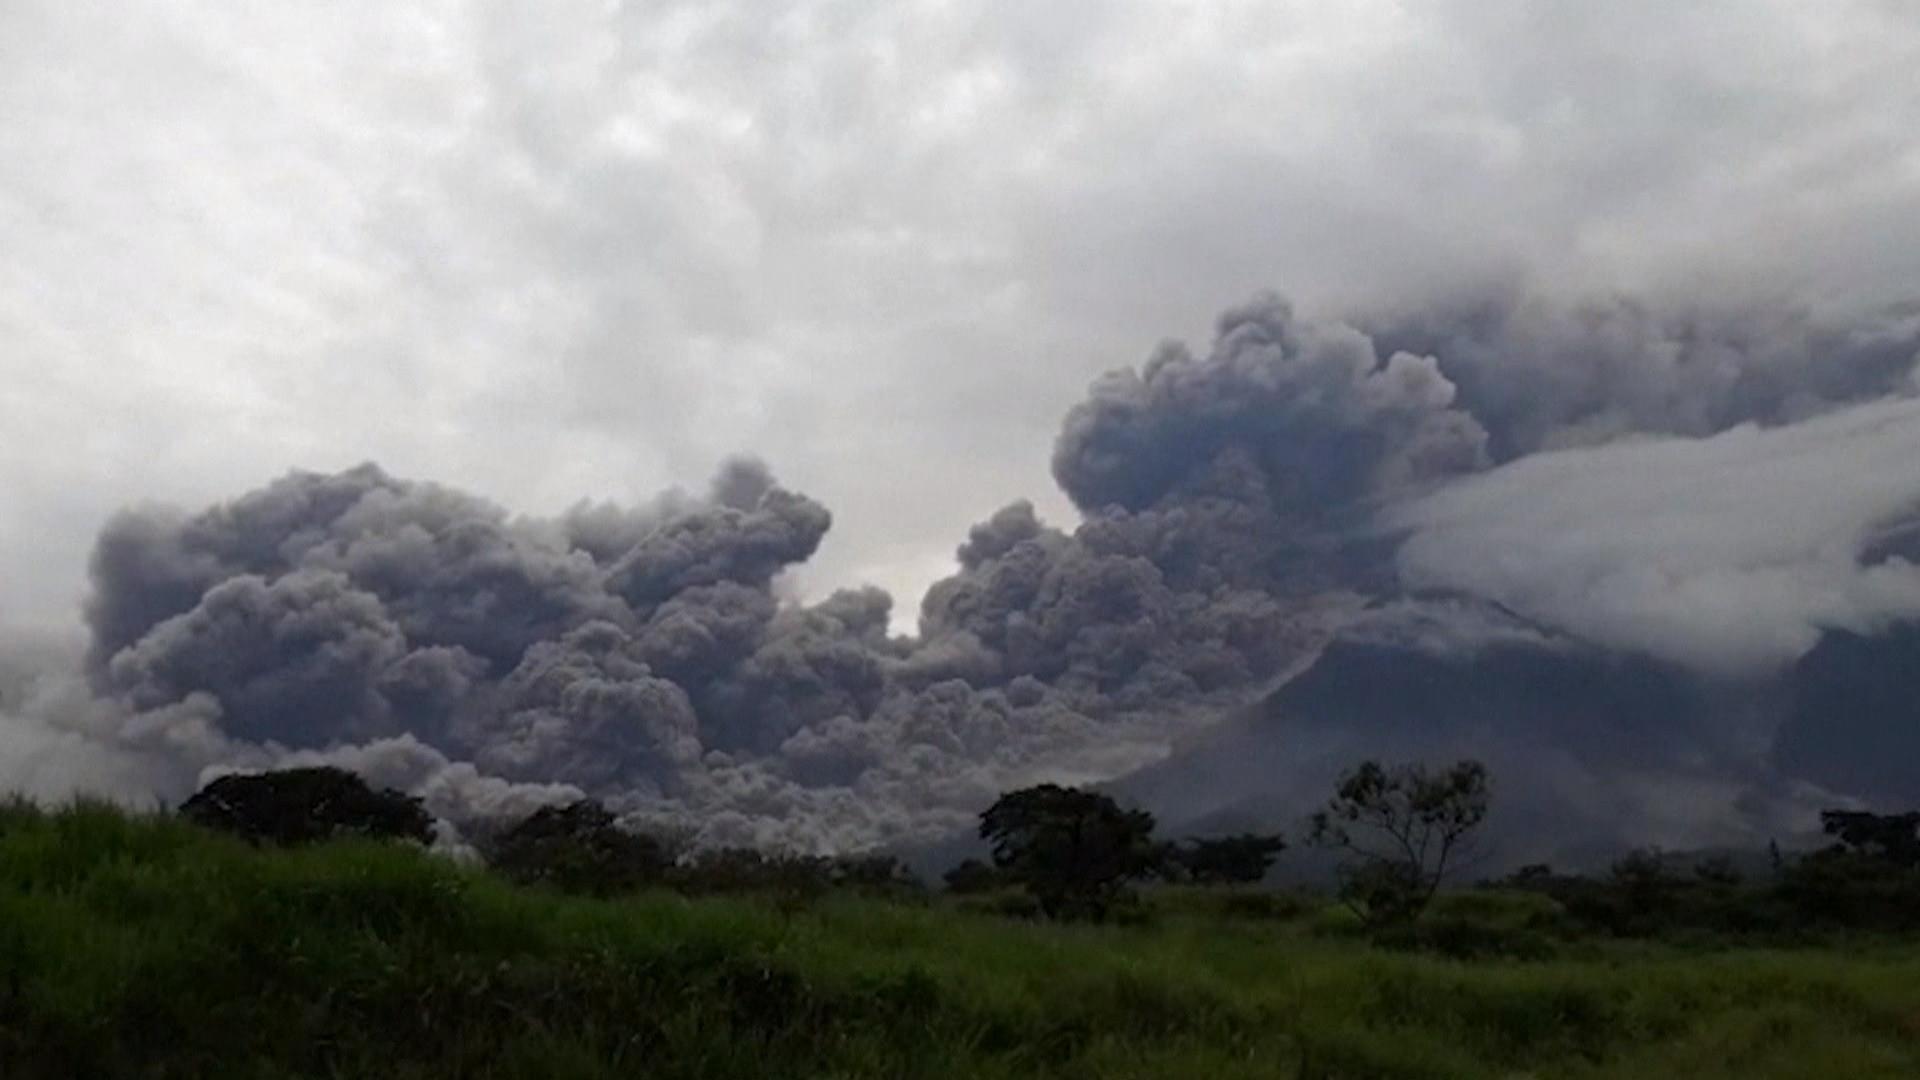 Erupting Fuego volcano in Guatemala has killed at least 25 - TODAY.com